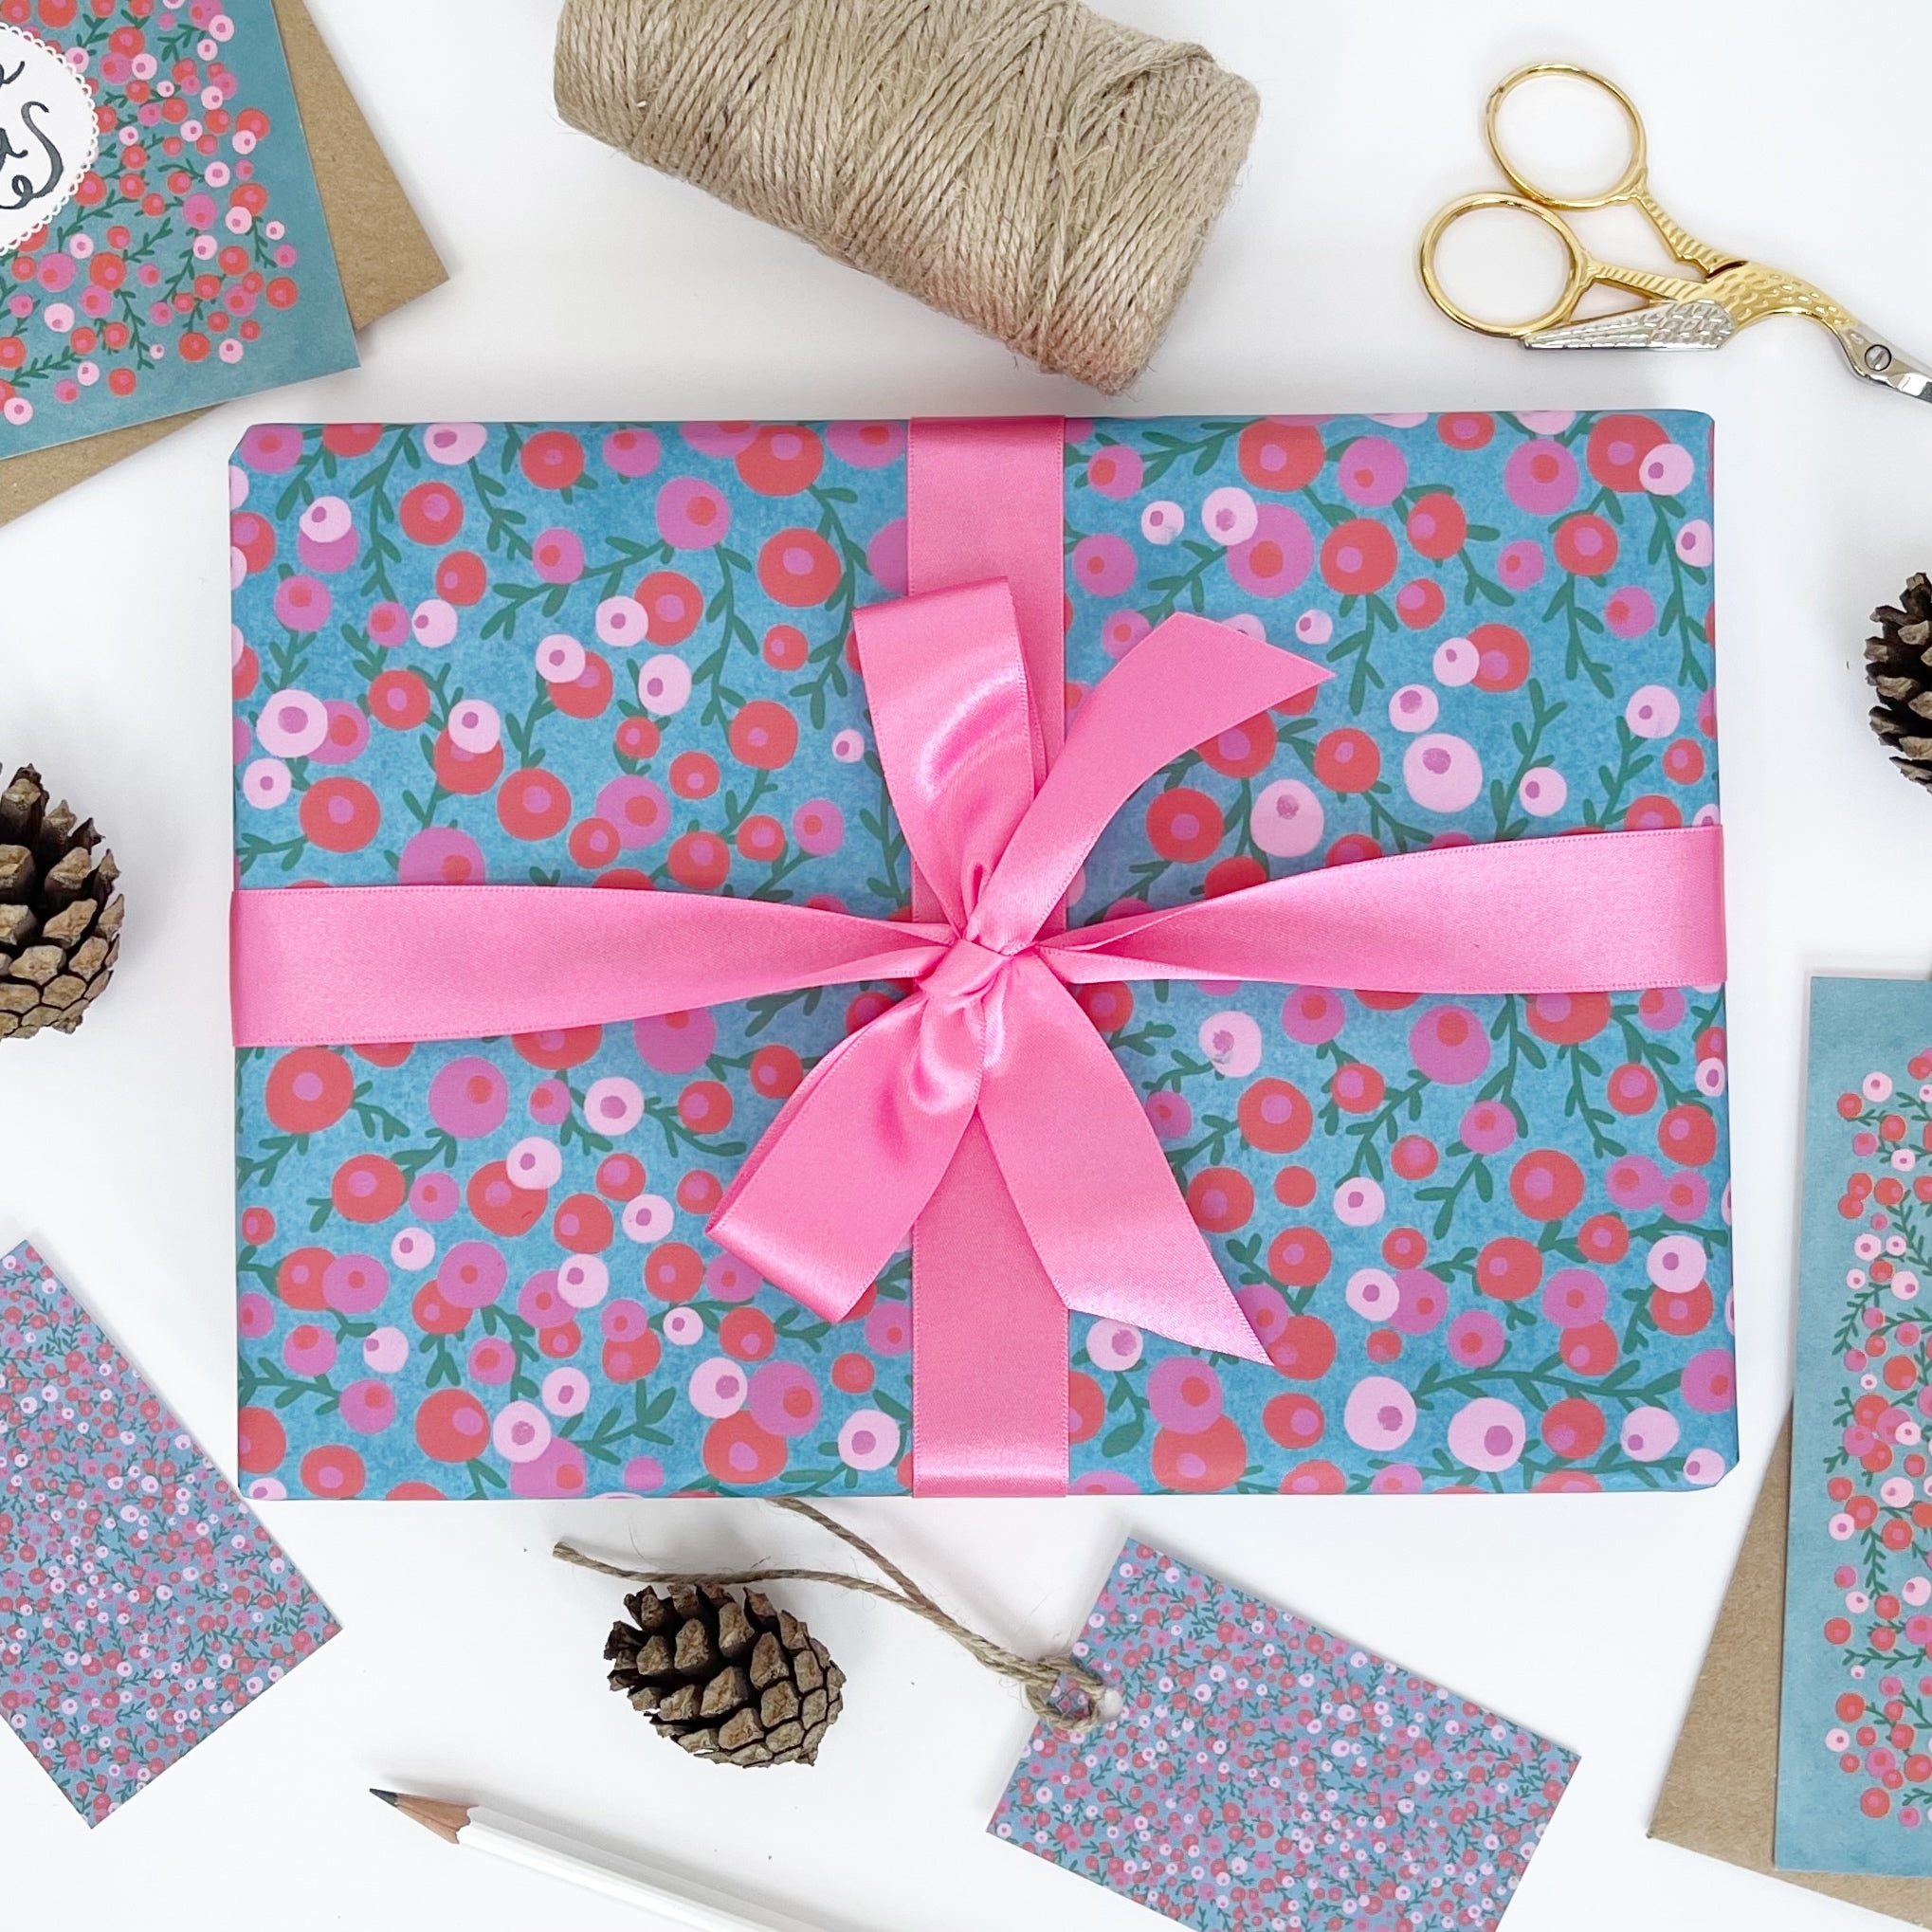 Christmas Red & Pink Berries Recyclable Wrapping Paper Set - AQUA Eco Friendly Gift Wrap and Tags